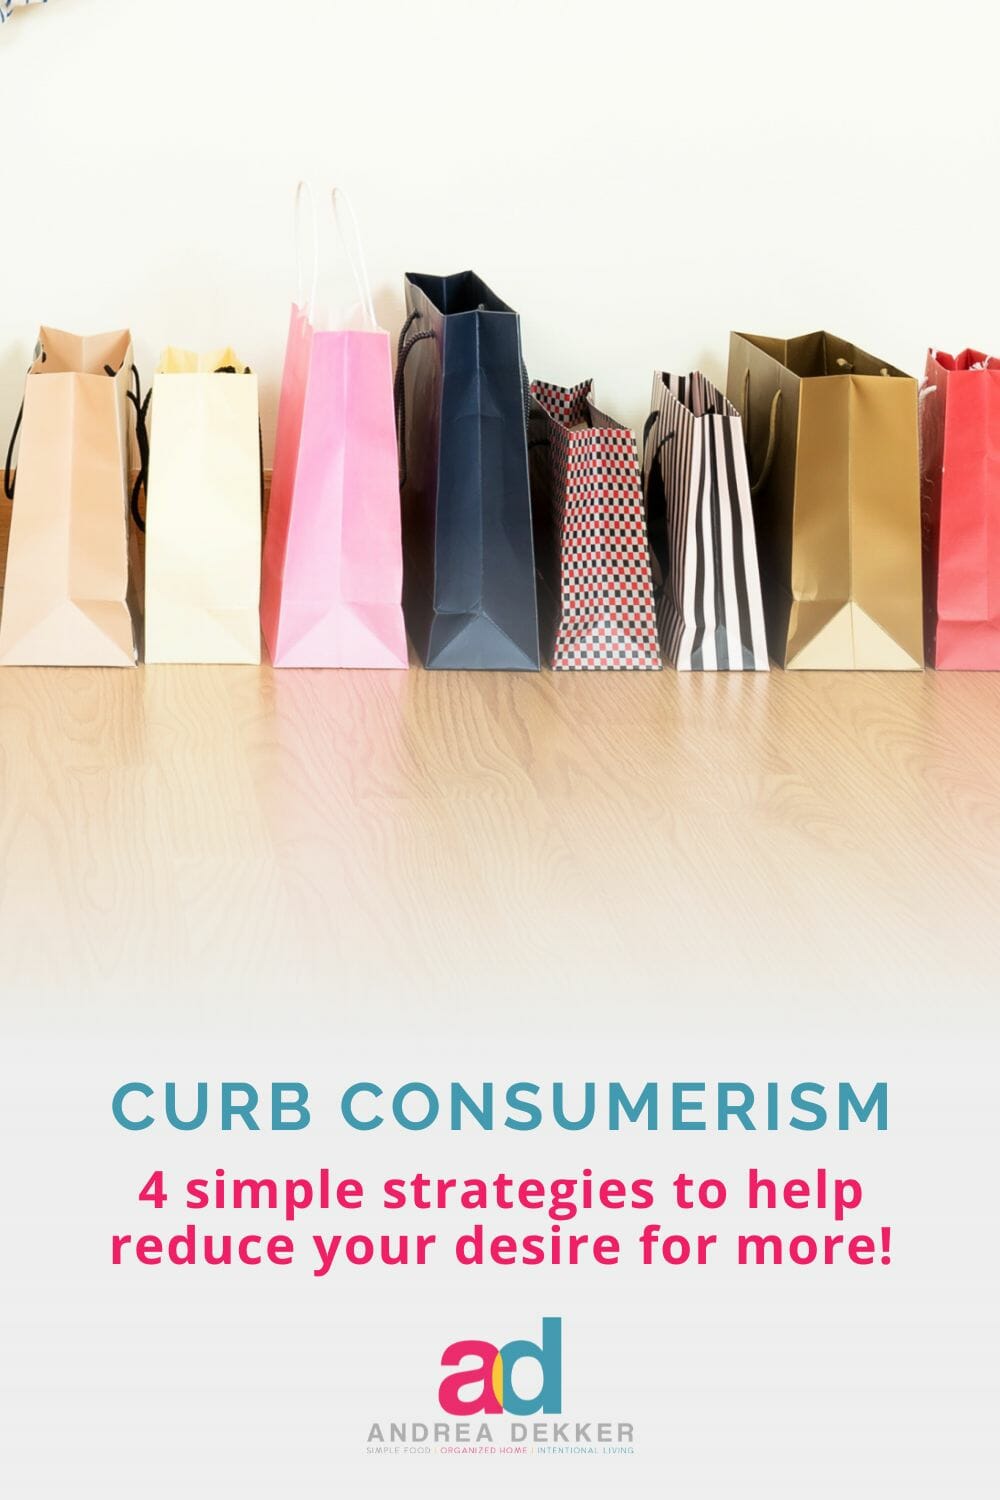 These simple strategies will help your family curb consumeristic tendencies, live more simply, have less clutter, and stick more closely to your budget! via @andreadekker